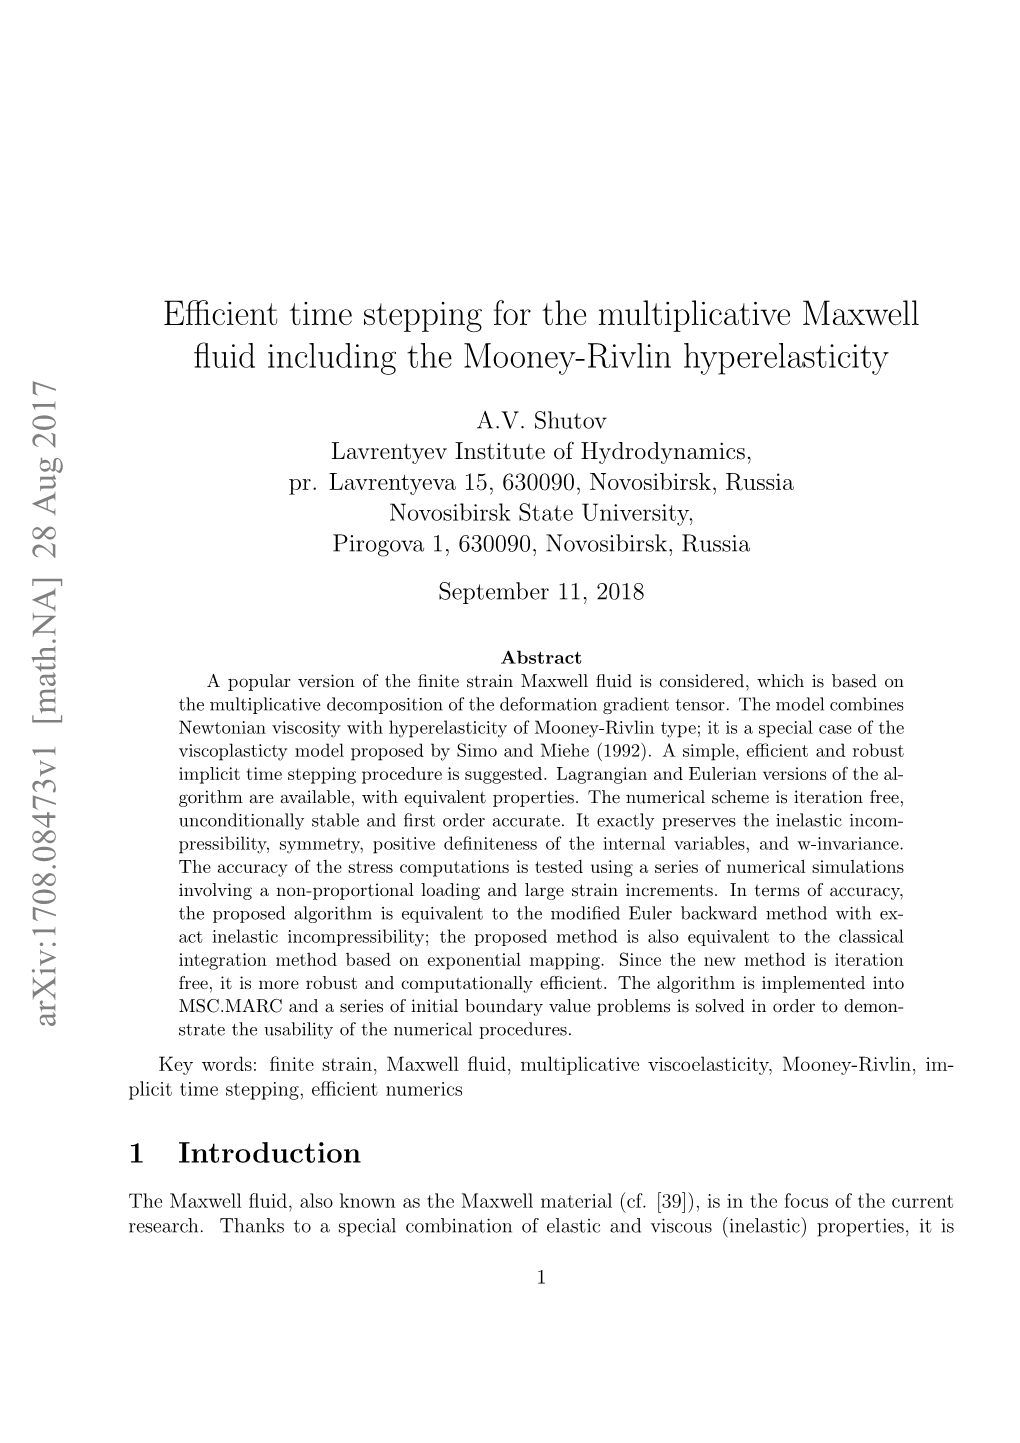 Efficient Time Stepping for the Multiplicative Maxwell Fluid